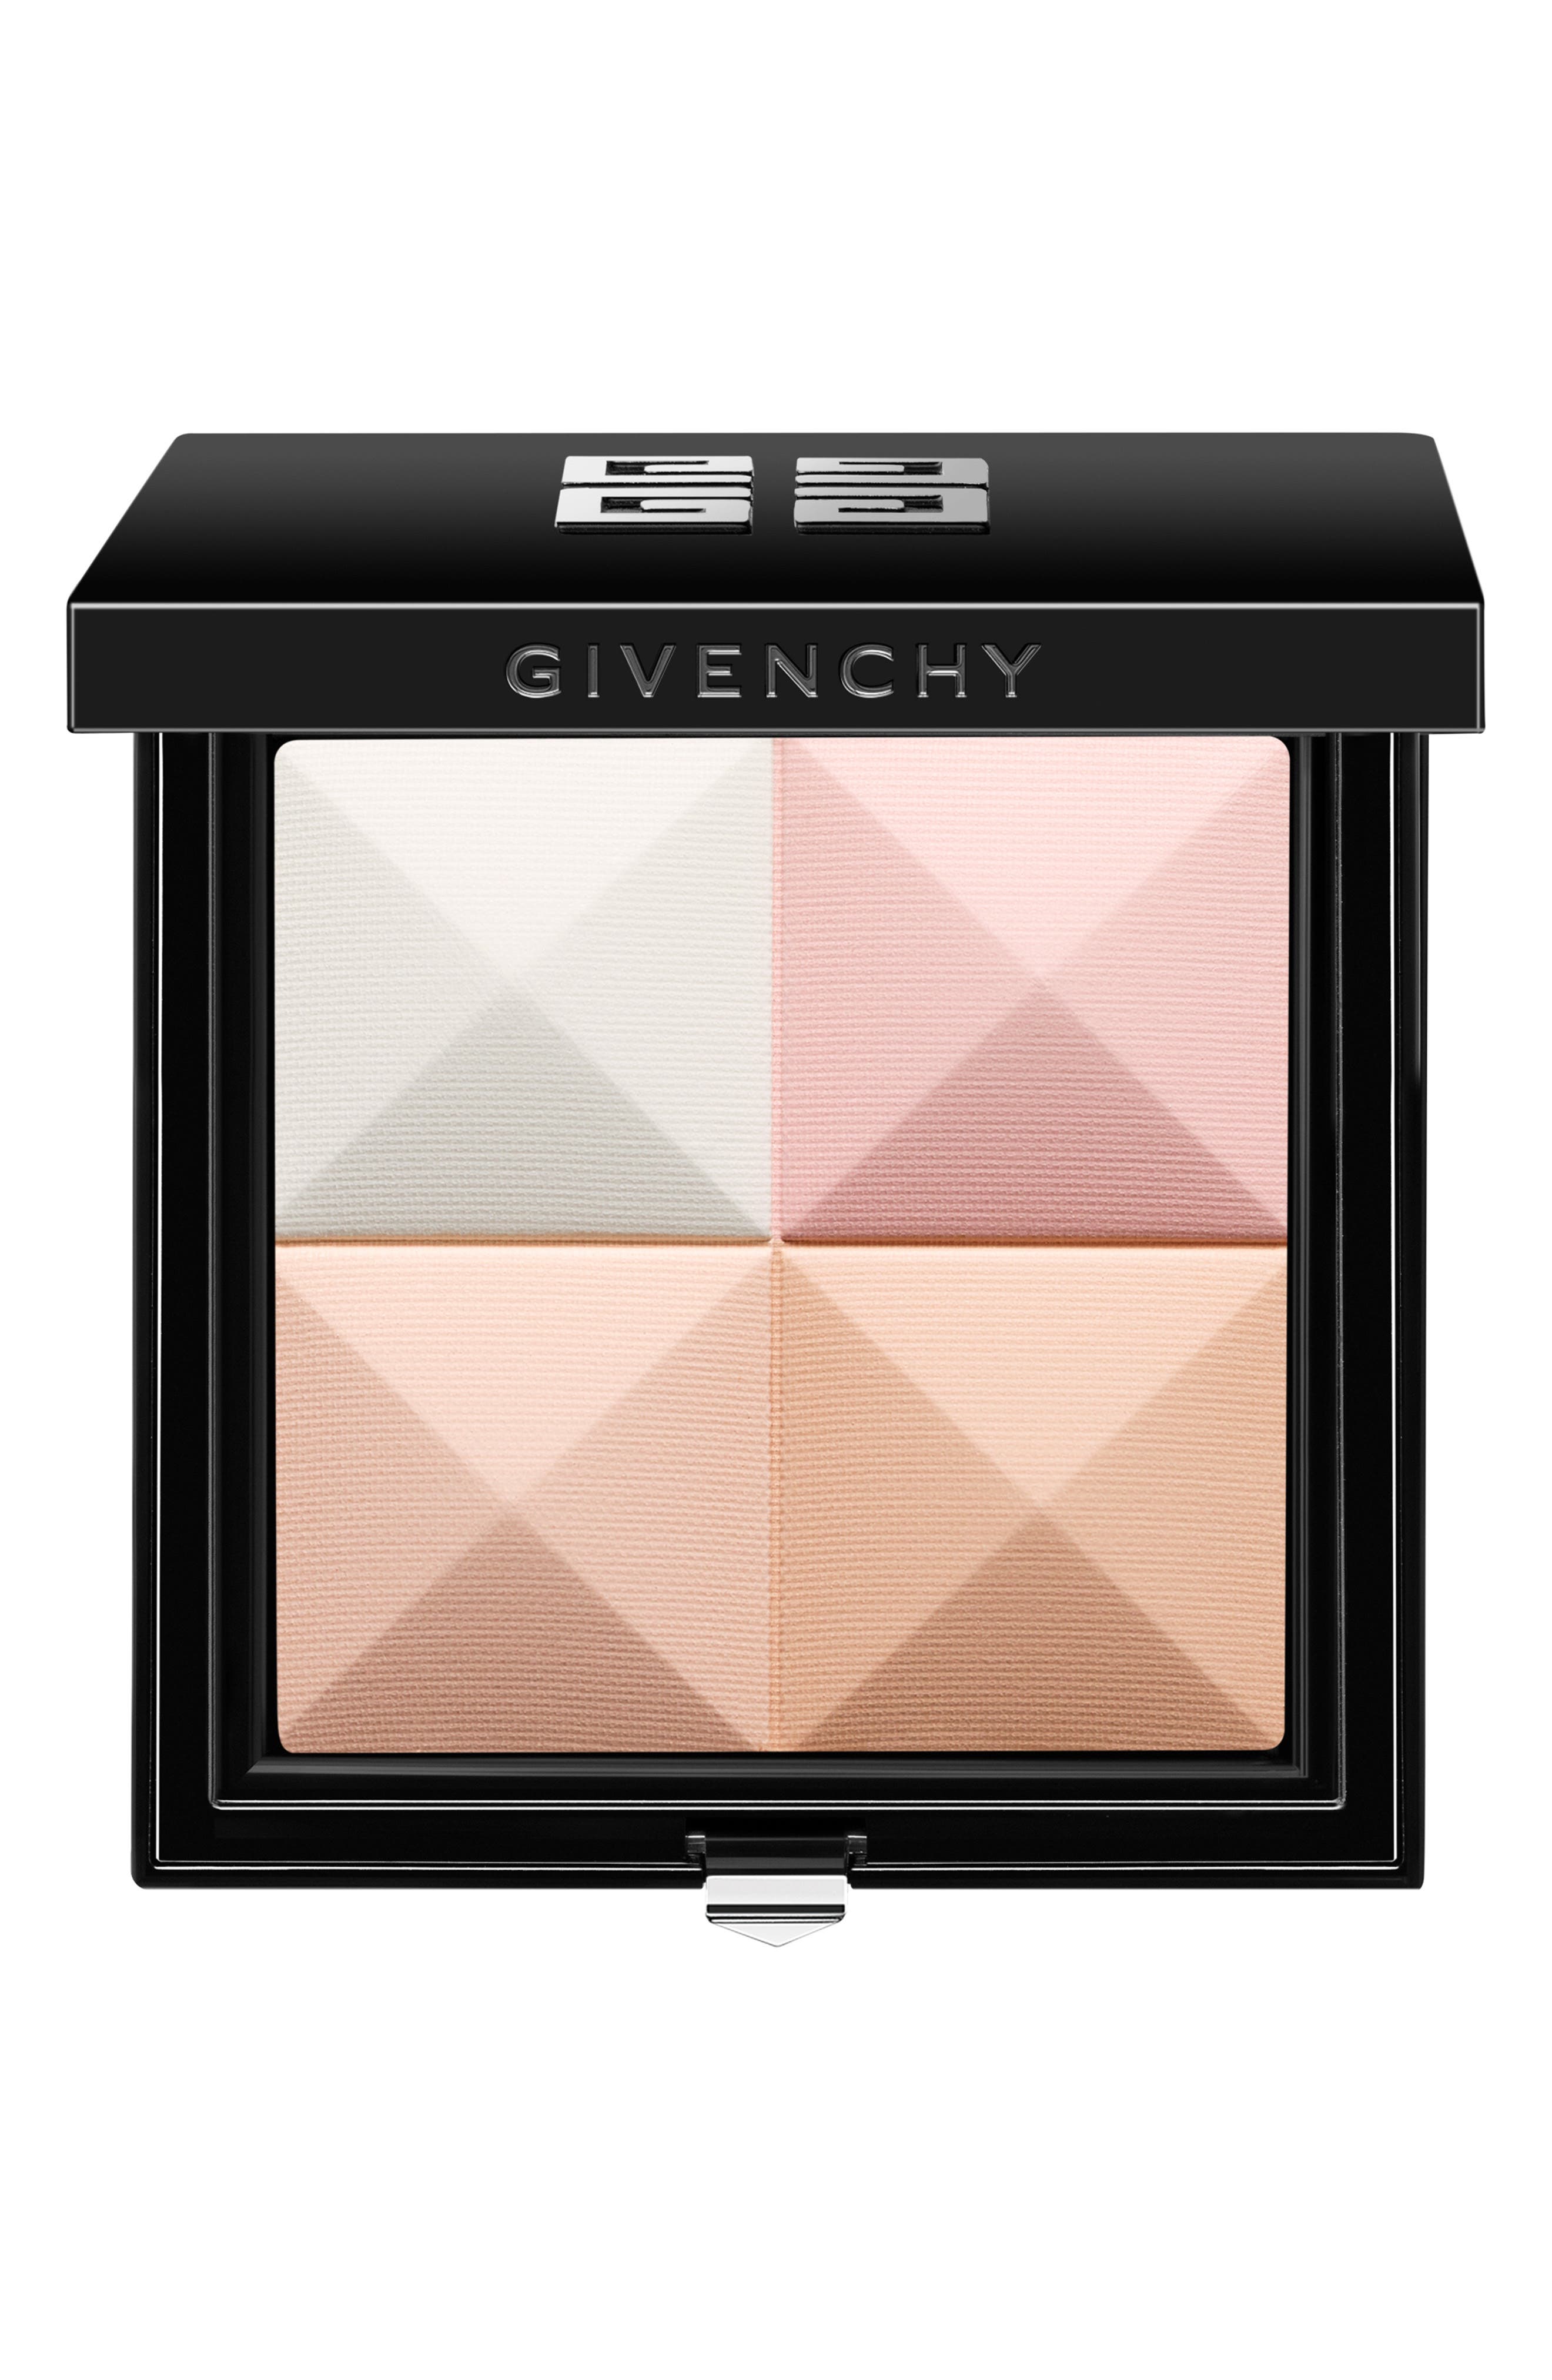 Givenchy Prisme Visage Perfecting Face 